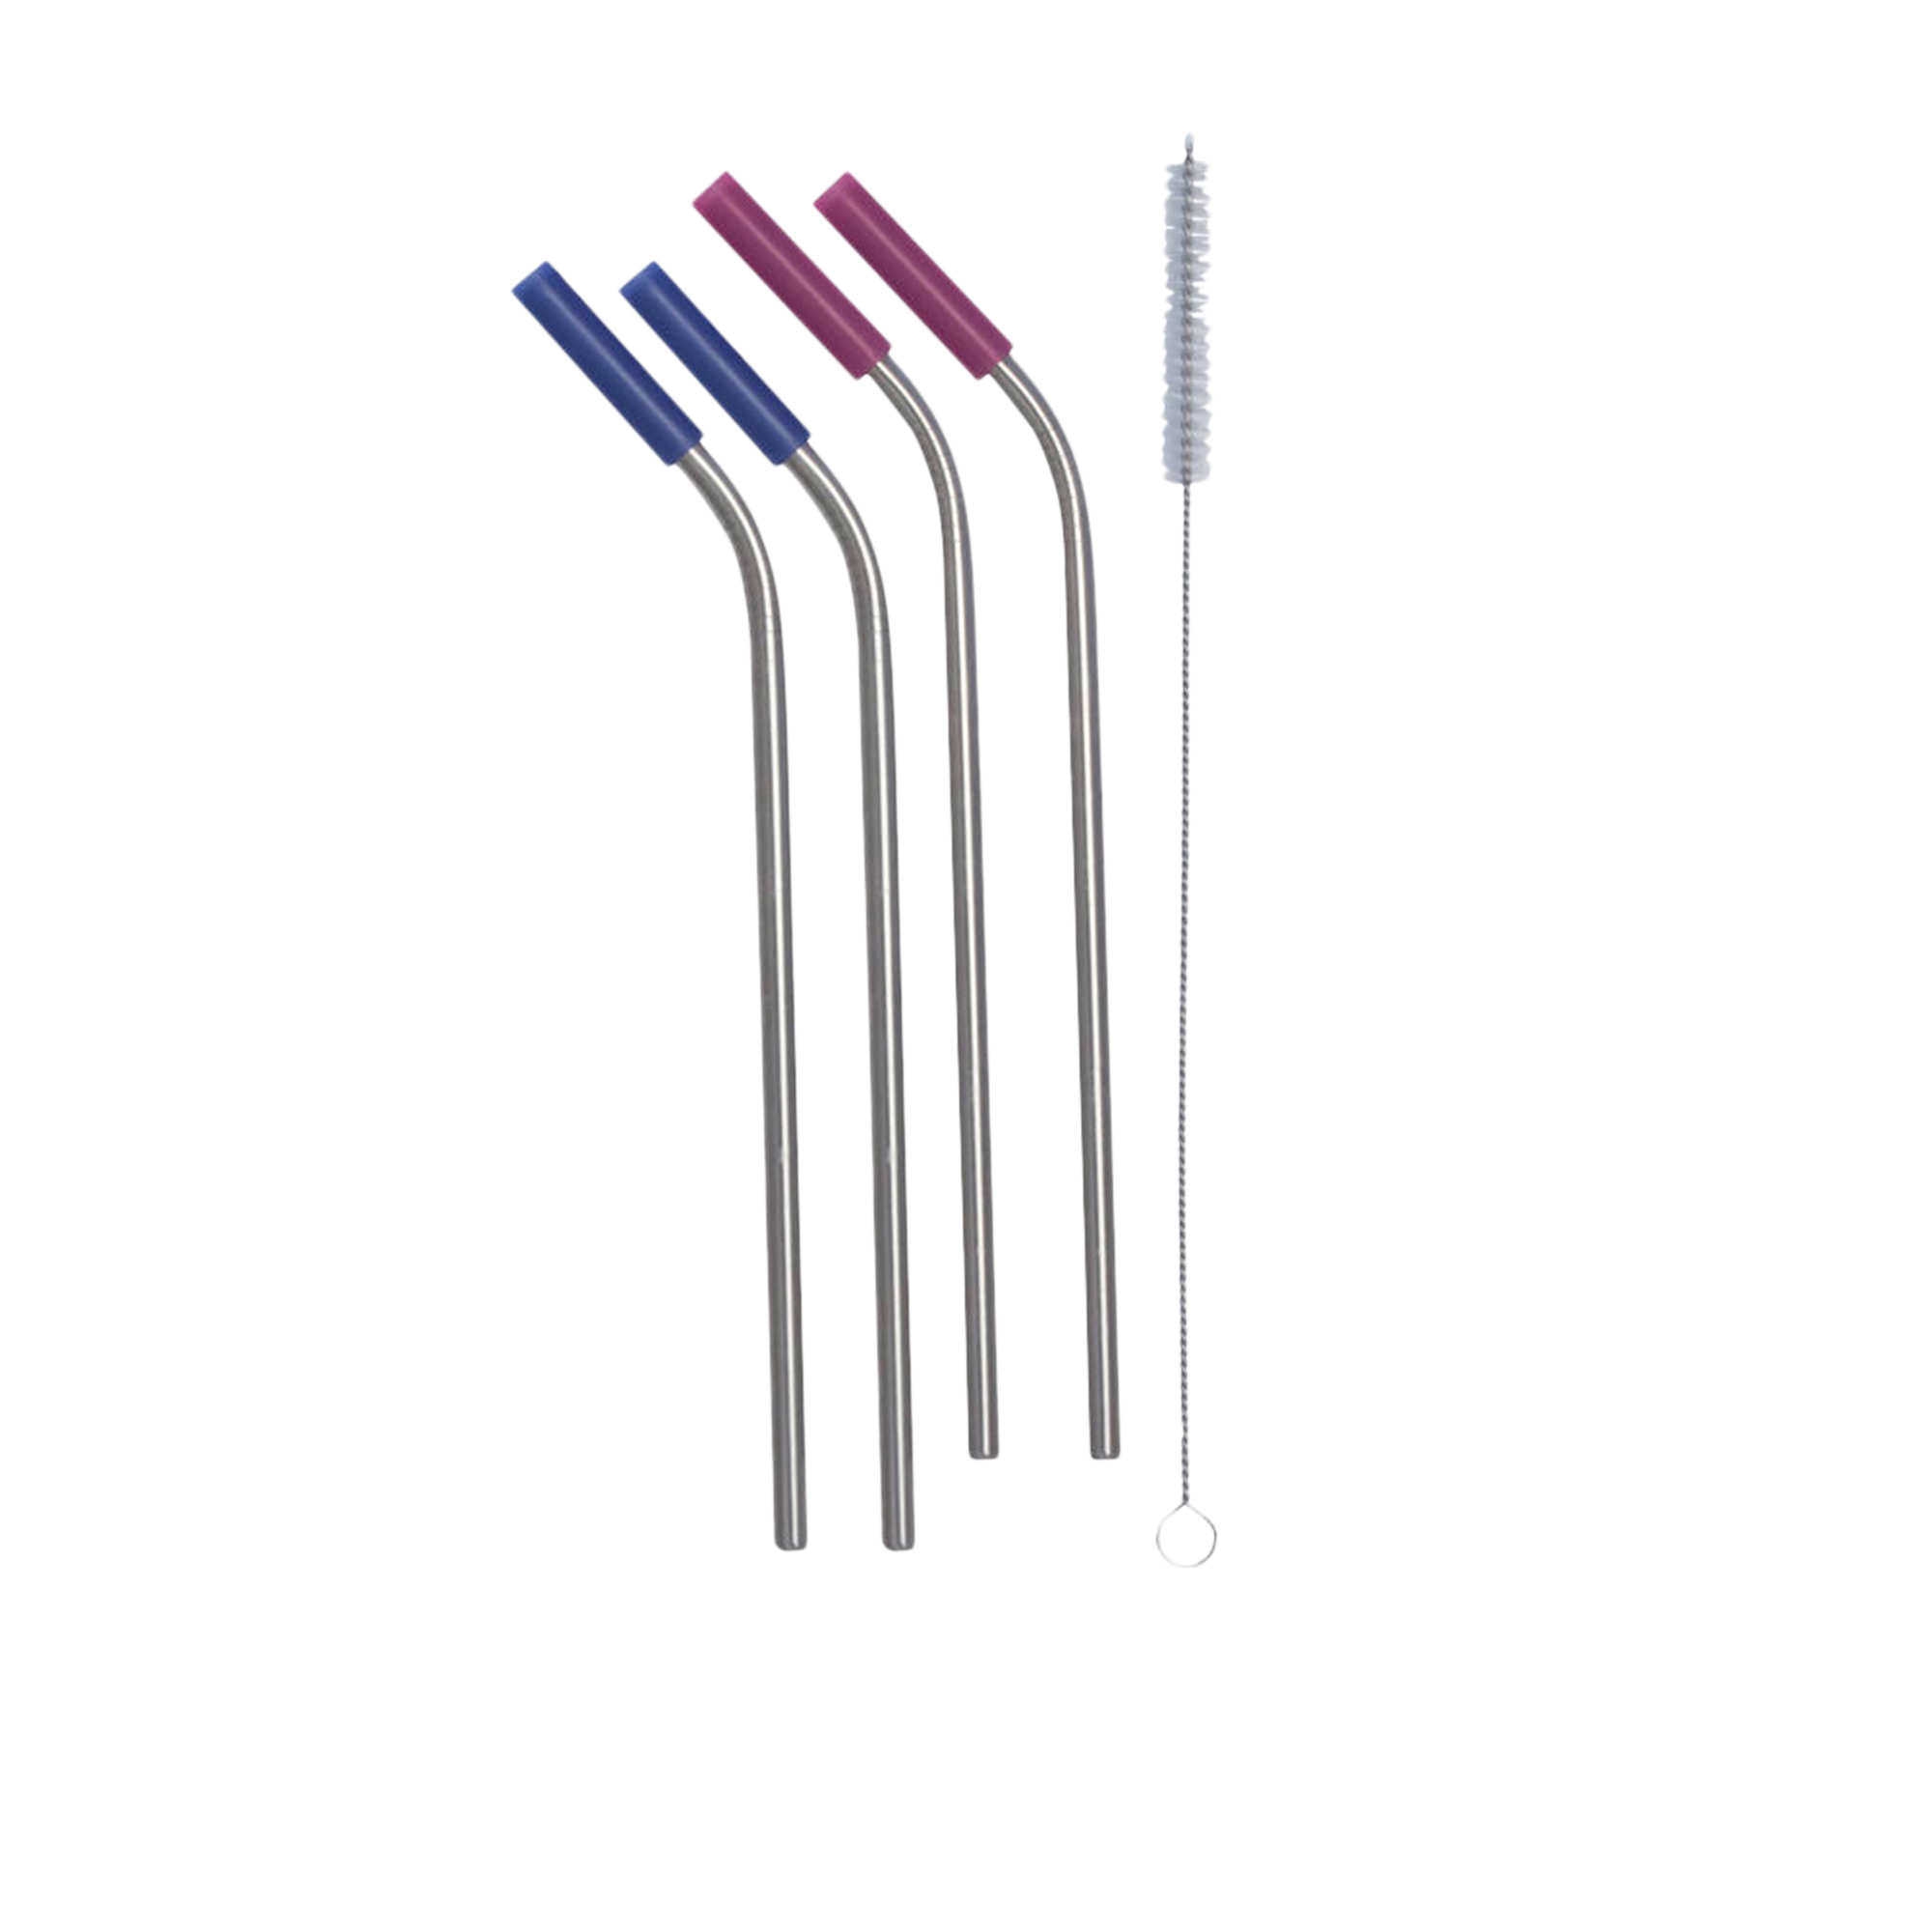 Cuisena Stainless Steel Straw Silicone Tips with Cleaning Brush Set of 4 Silver Image 1